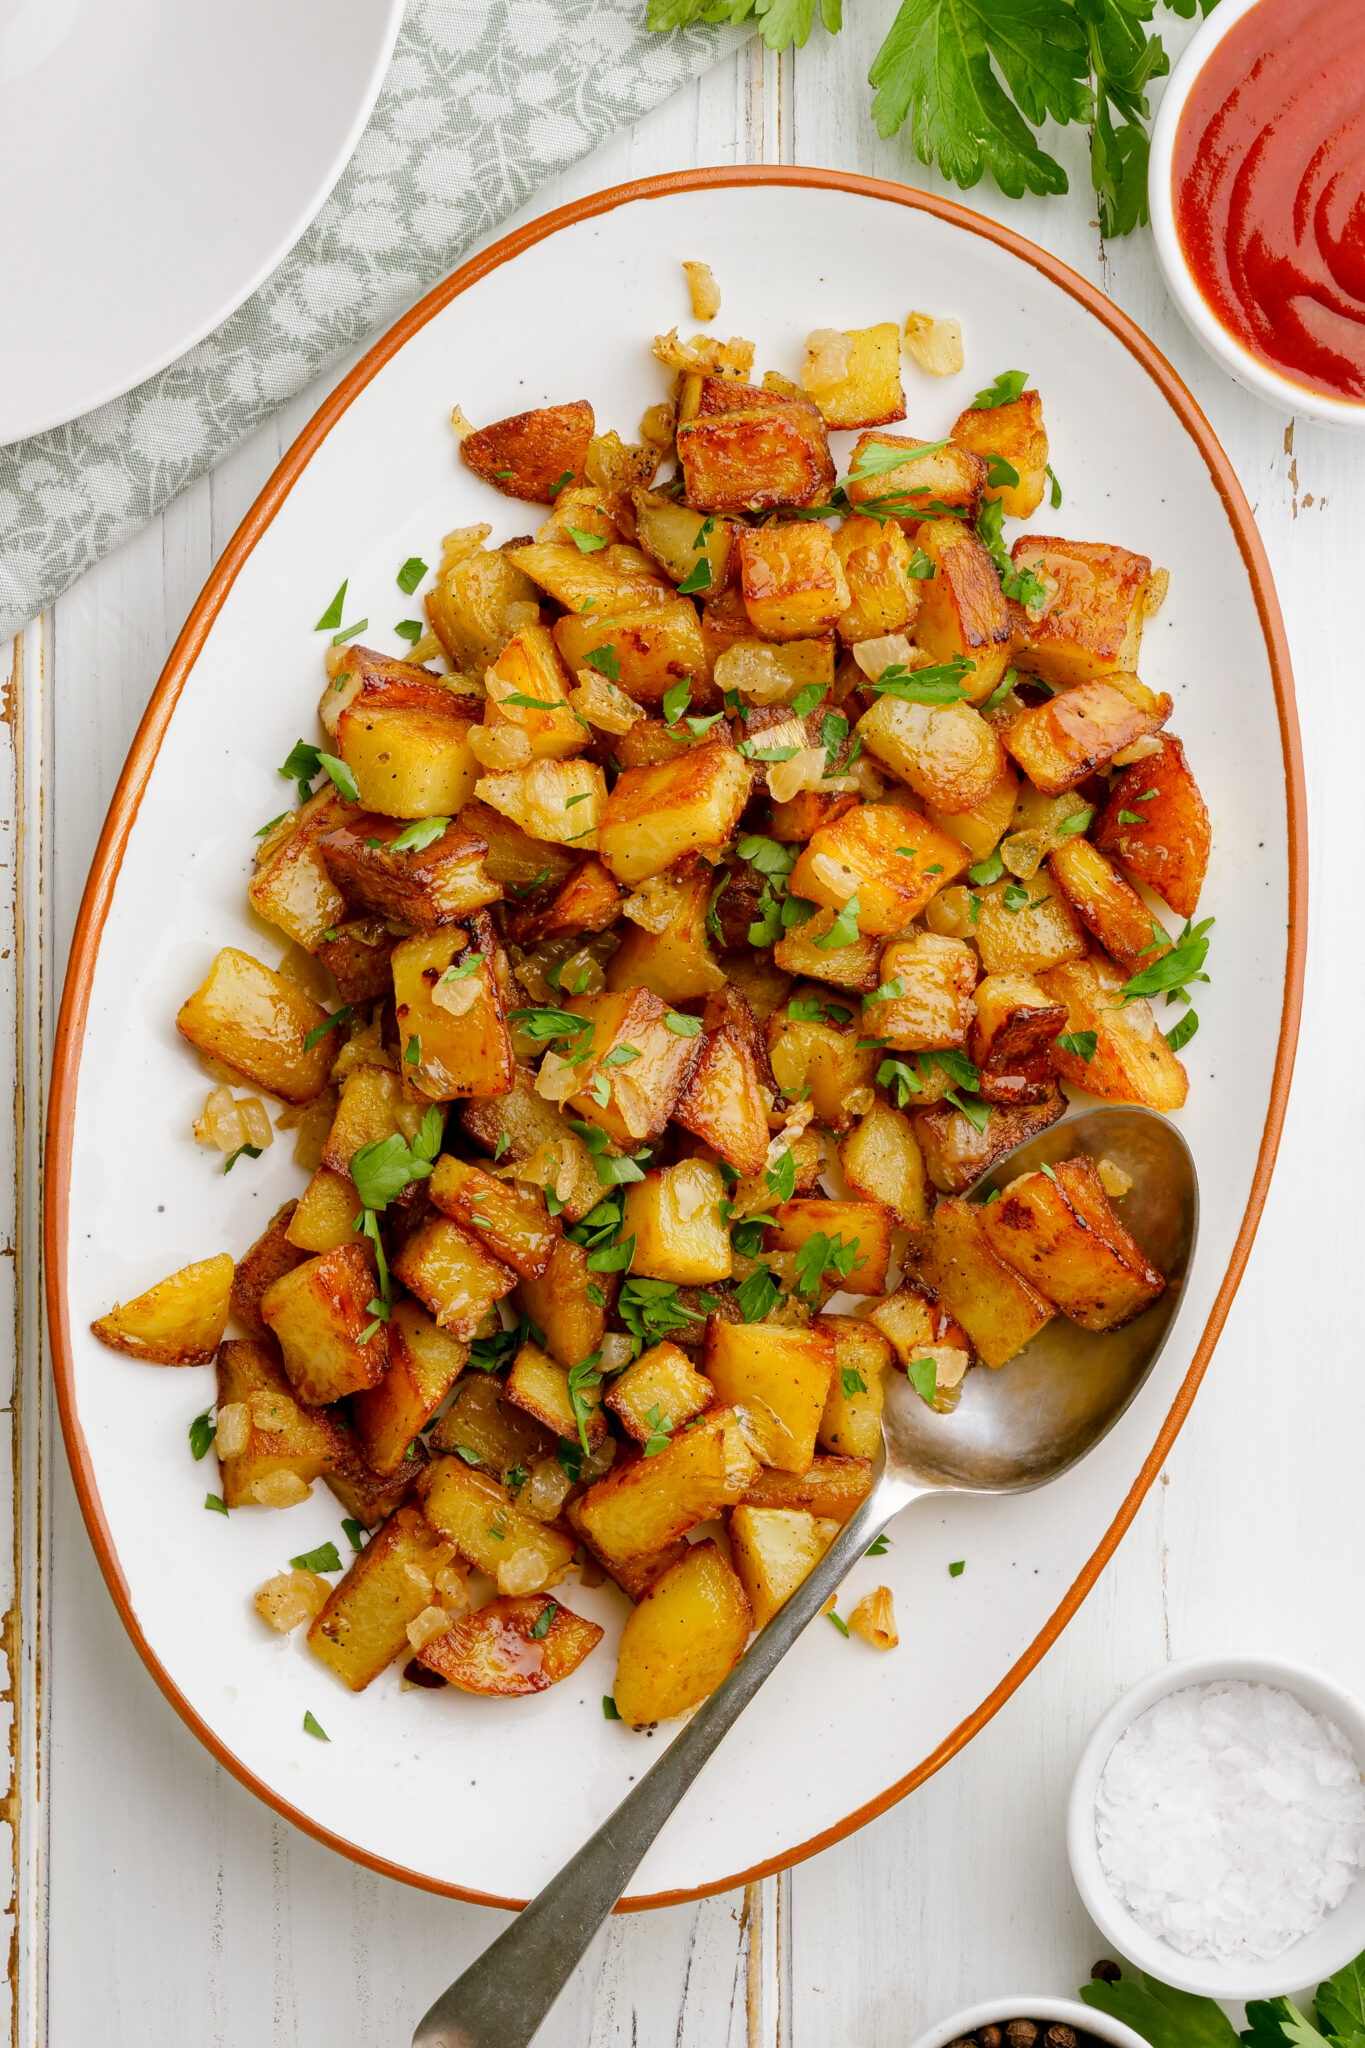 Home Fries - Easy Peasy Meals